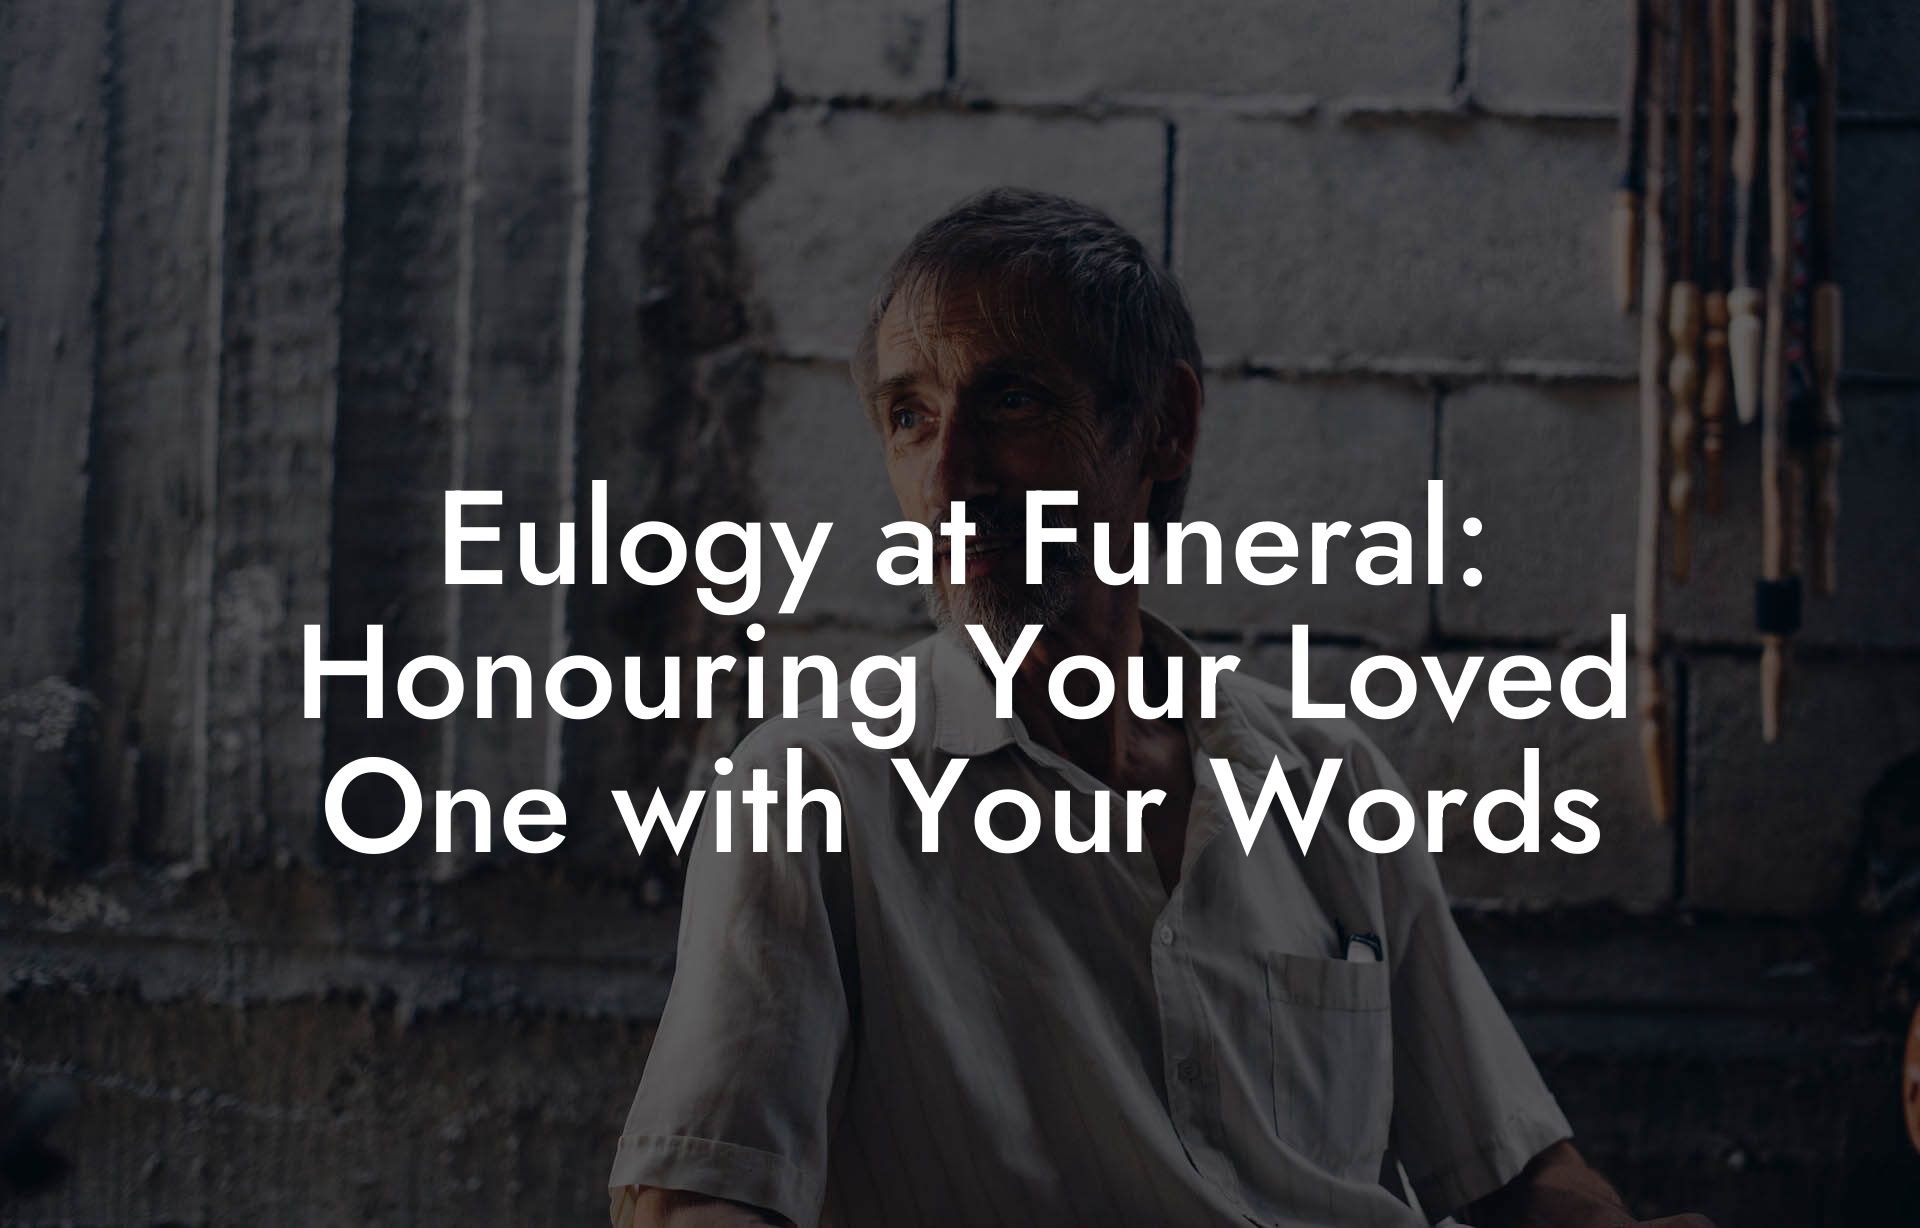 Eulogy at Funeral: Honouring Your Loved One with Your Words